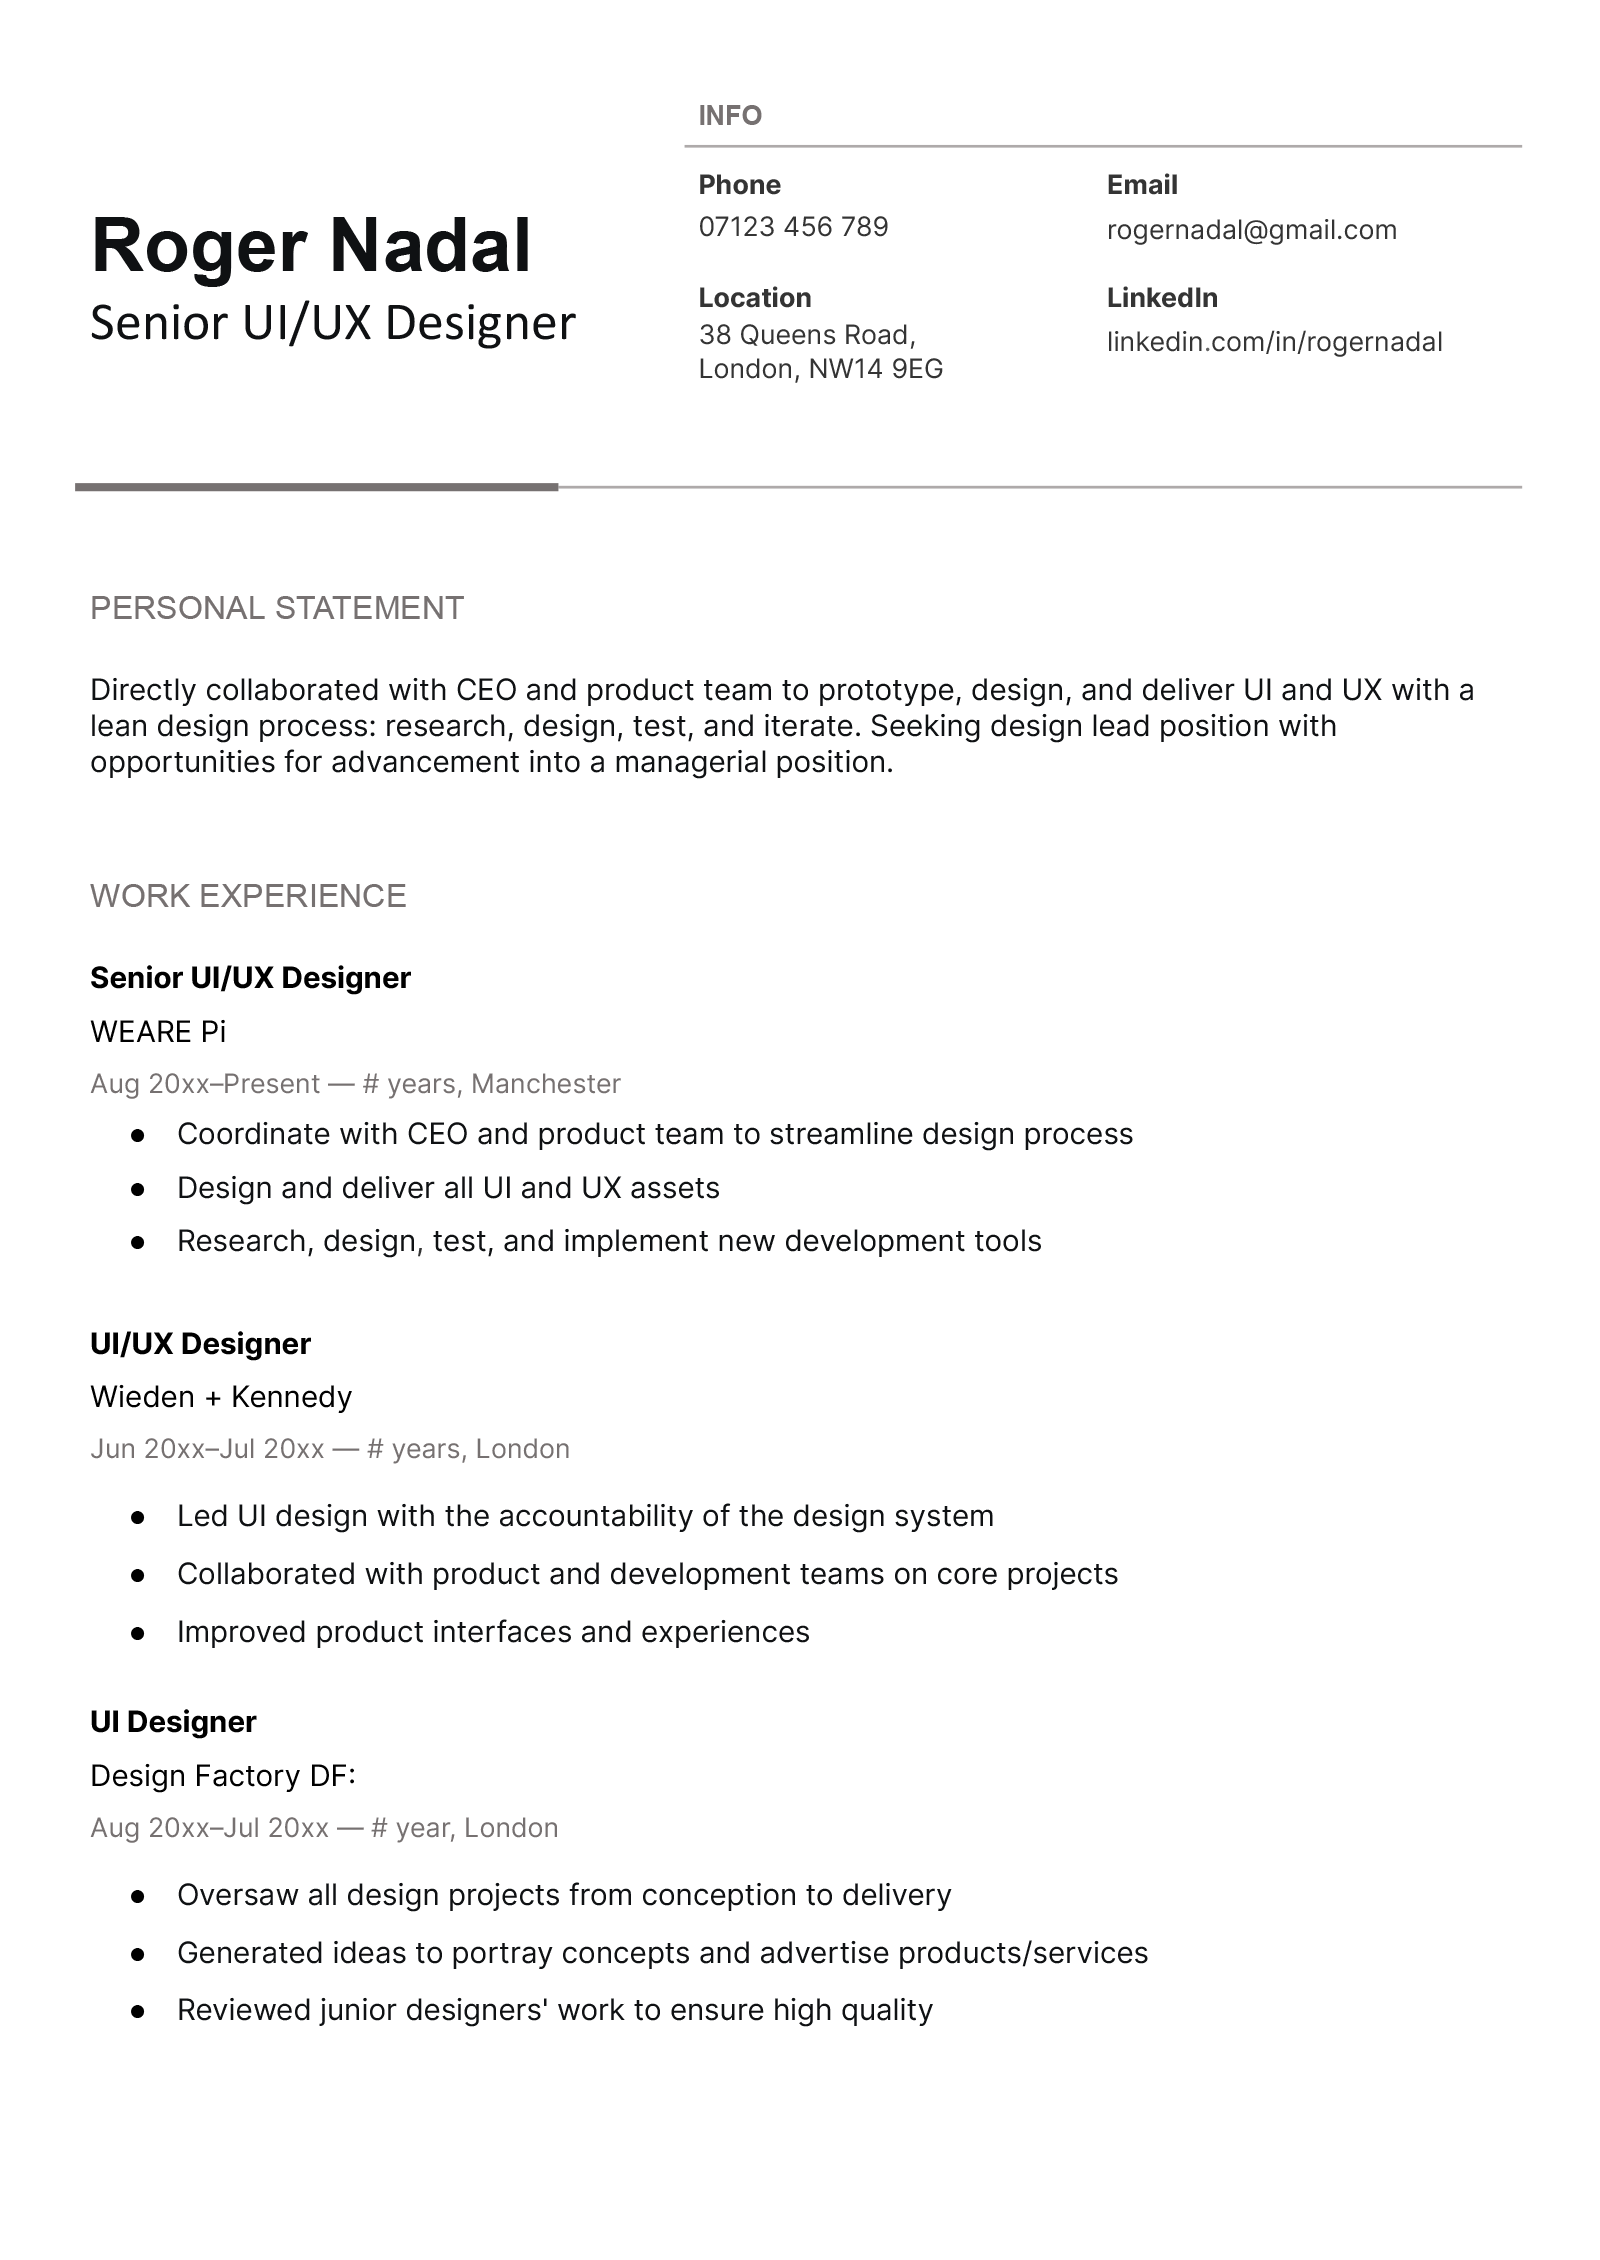 A third-party Google Docs CV template with a simple black and white design and the applicant's experience presented in short bulleted lists 